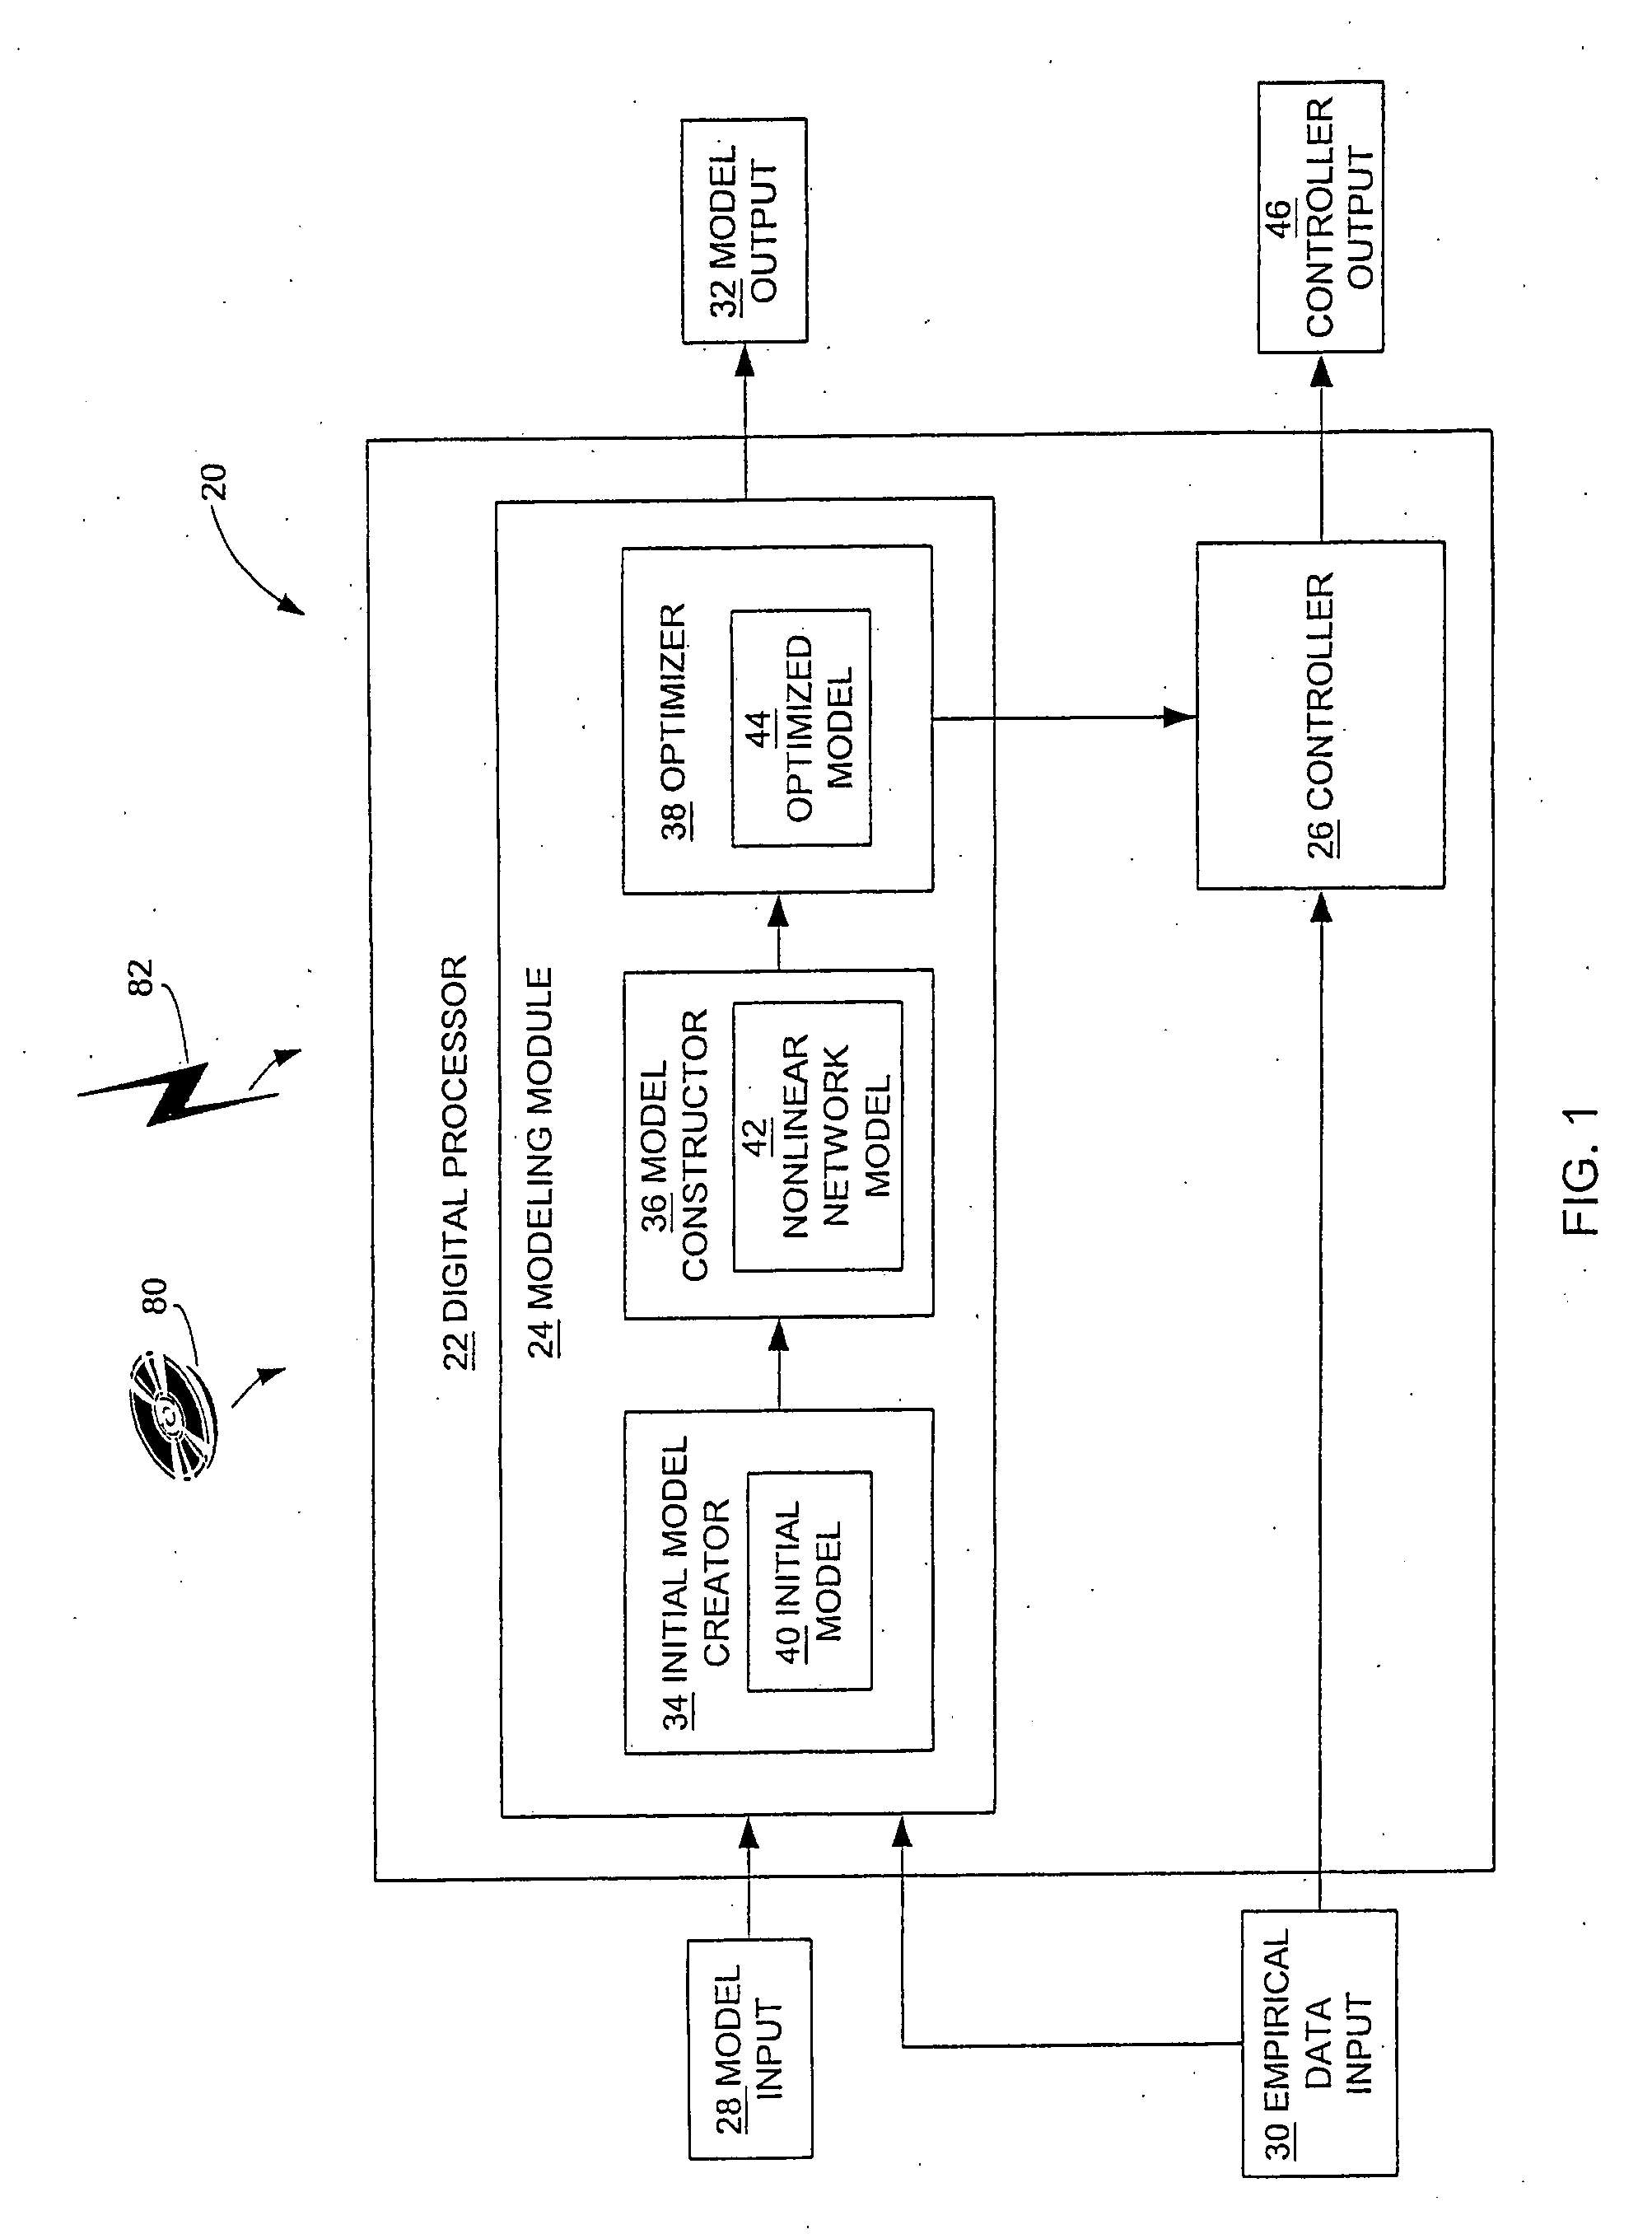 Computer method and apparatus for constraining a non-linear approximator of an empirical process